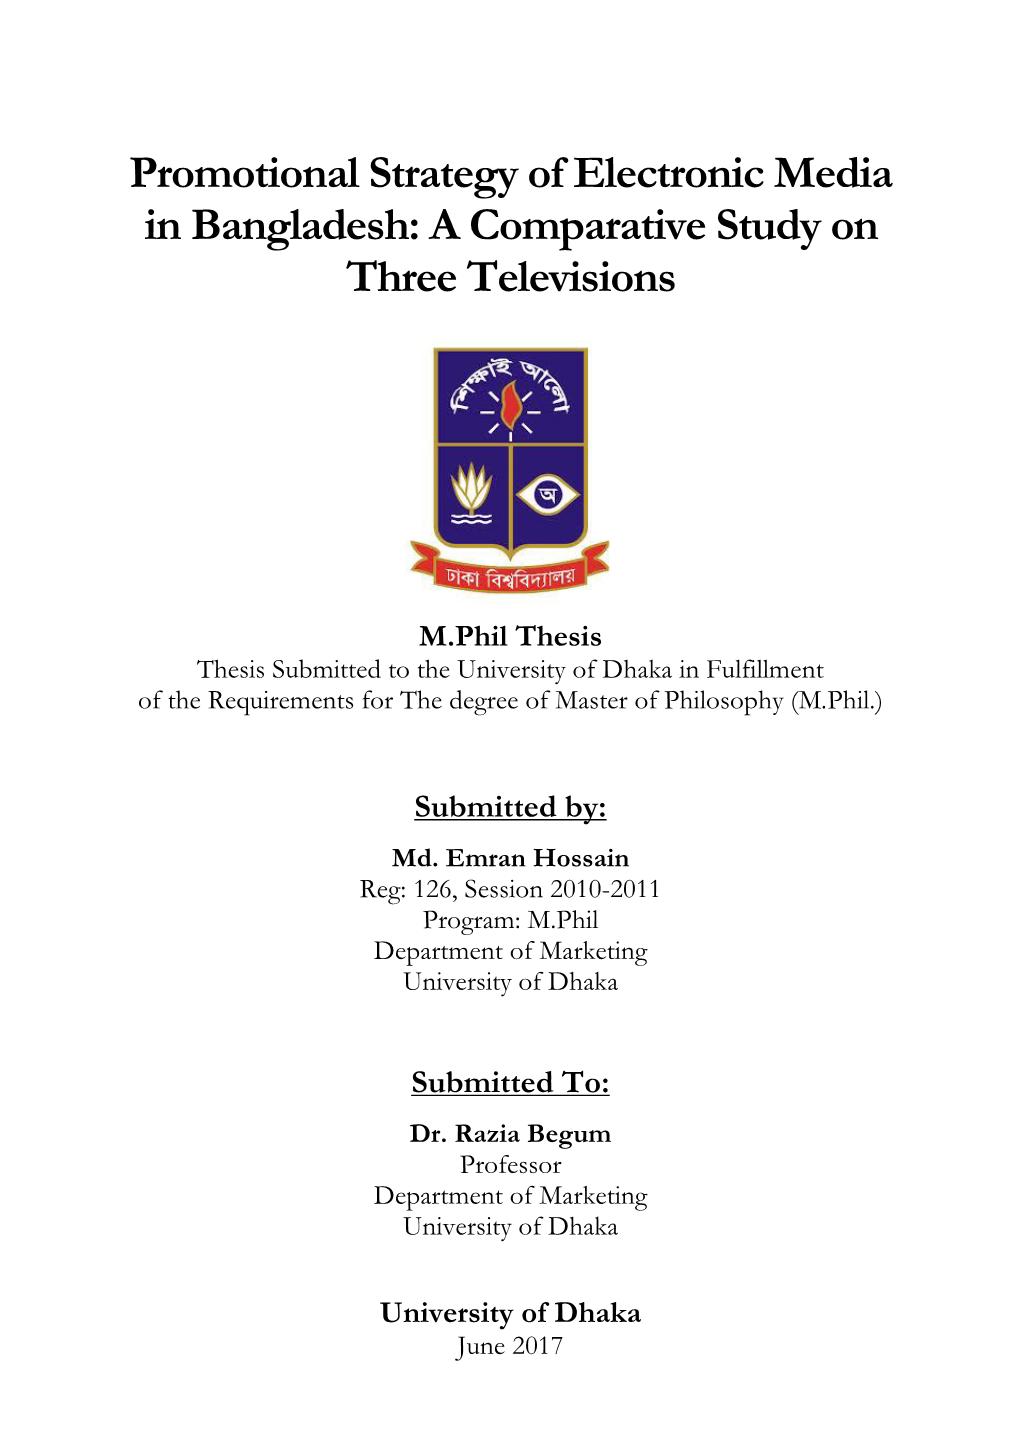 Promotional Strategy of Electronic Media in Bangladesh: a Comparative Study on Three Televisions